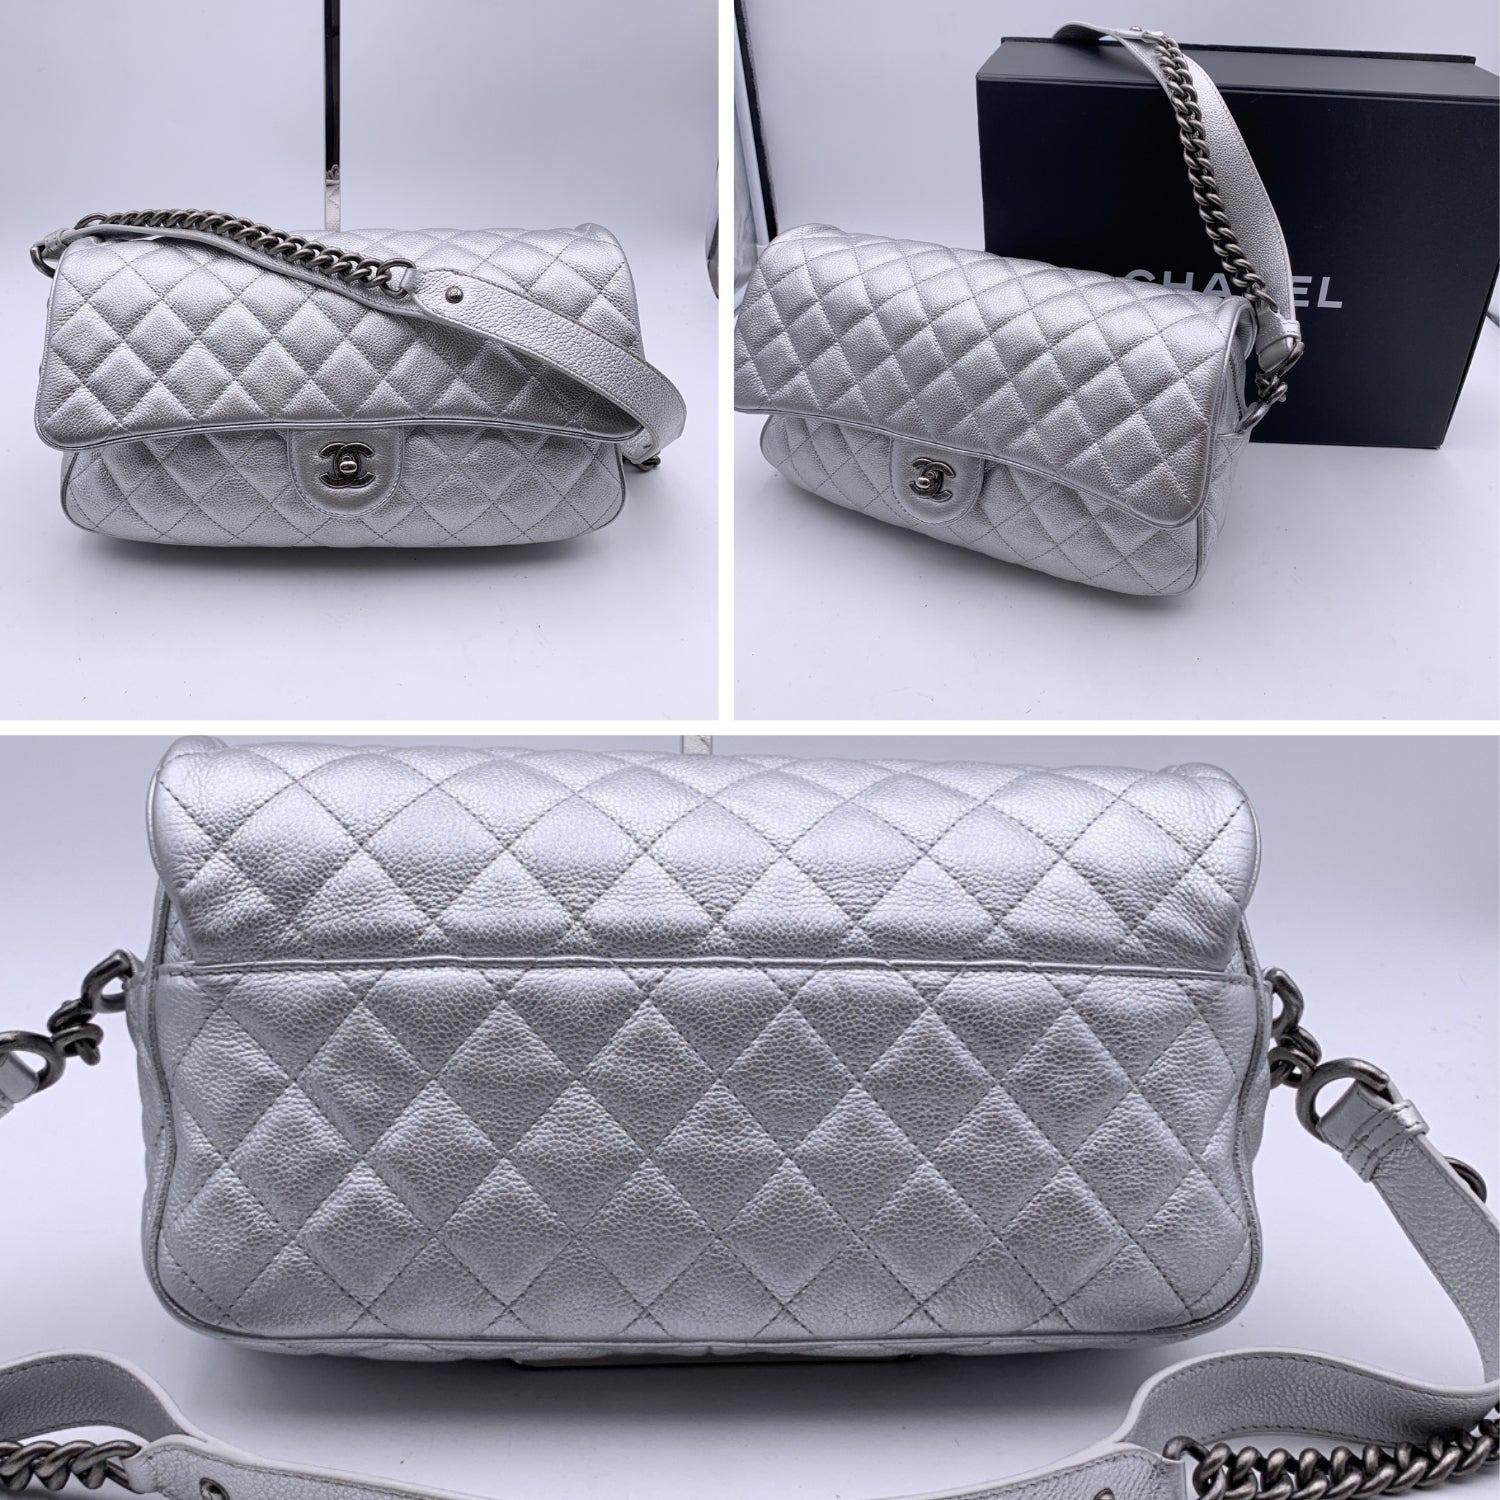 Women's Chanel Airline 2016 Silver Quilted Leather Easy Flap Shoulder Bag For Sale